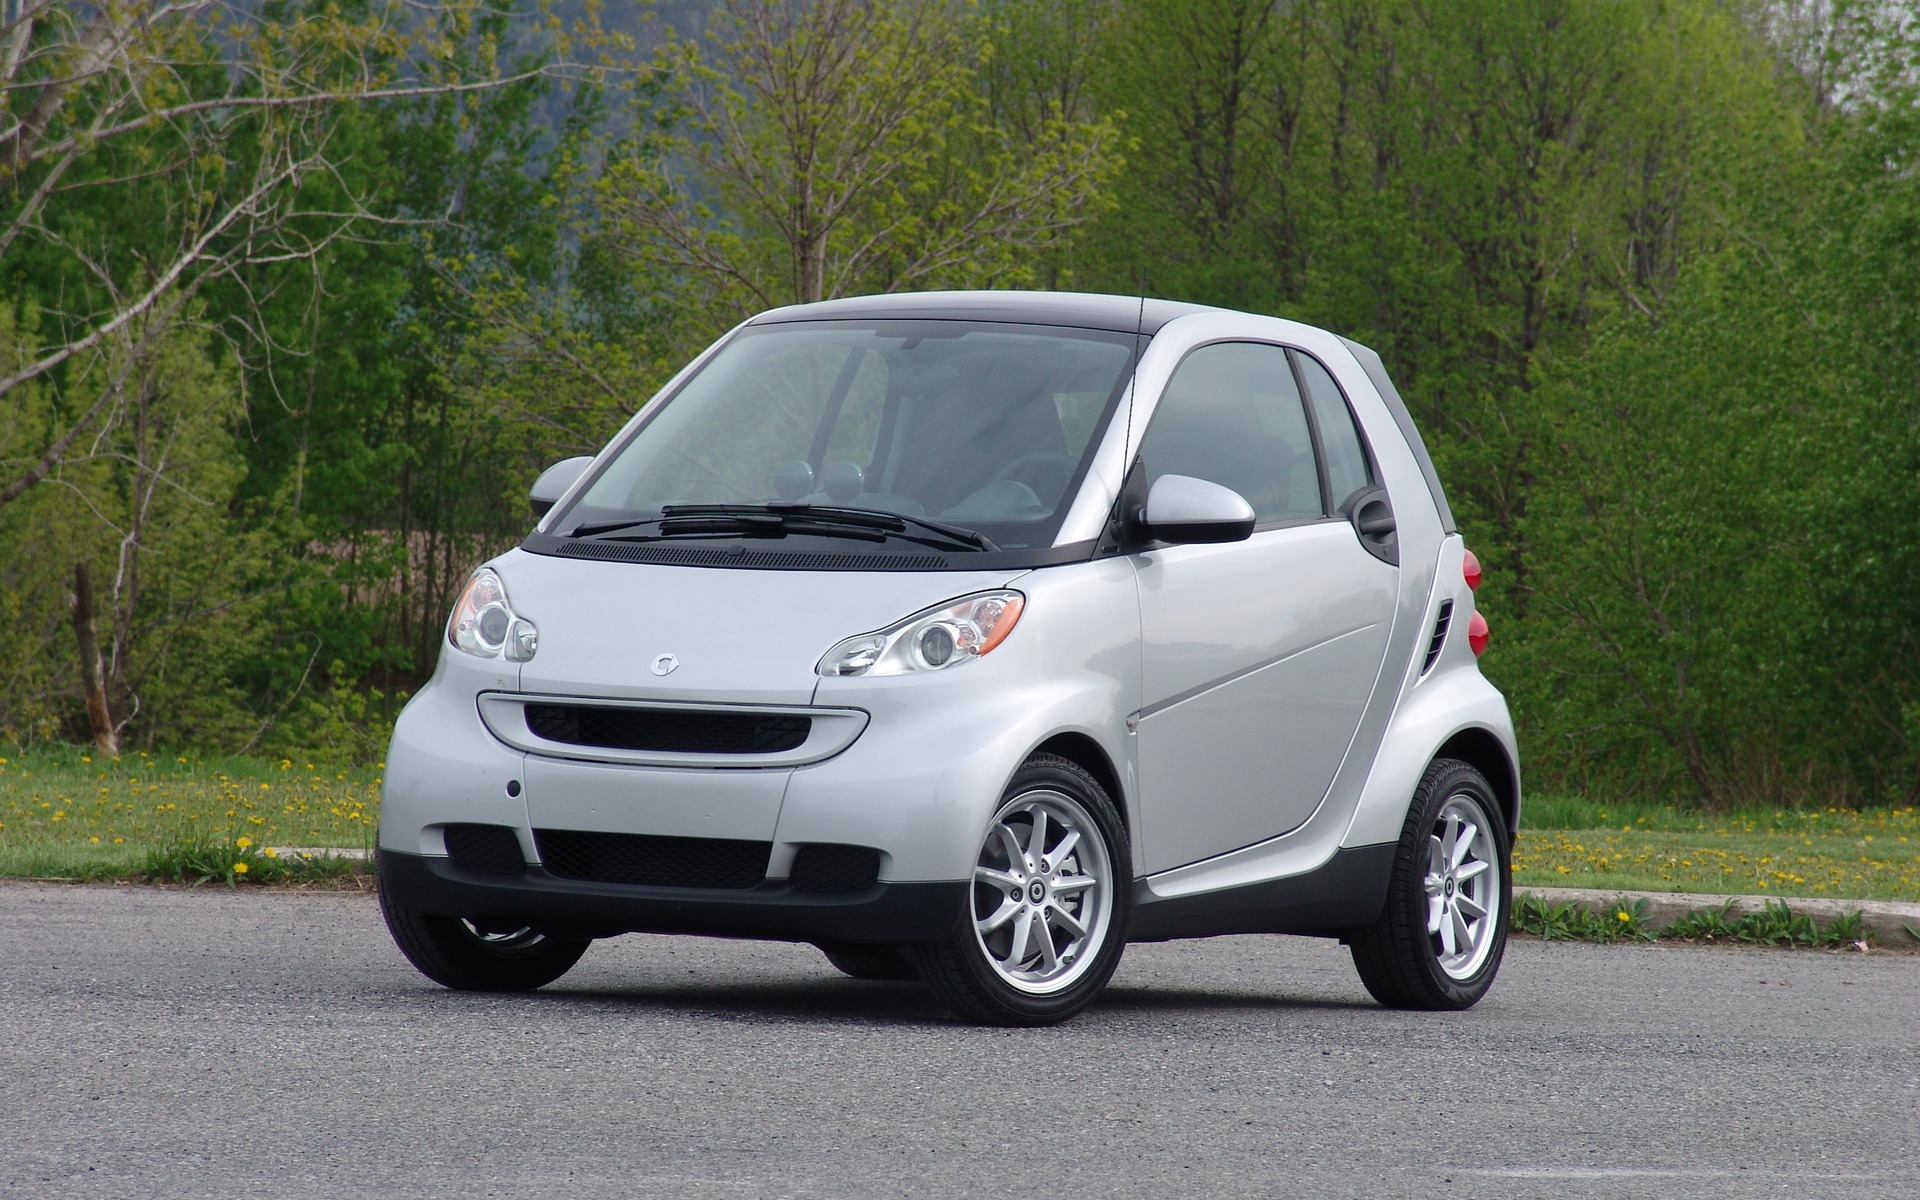 The second generation of the smart came out in 2008.